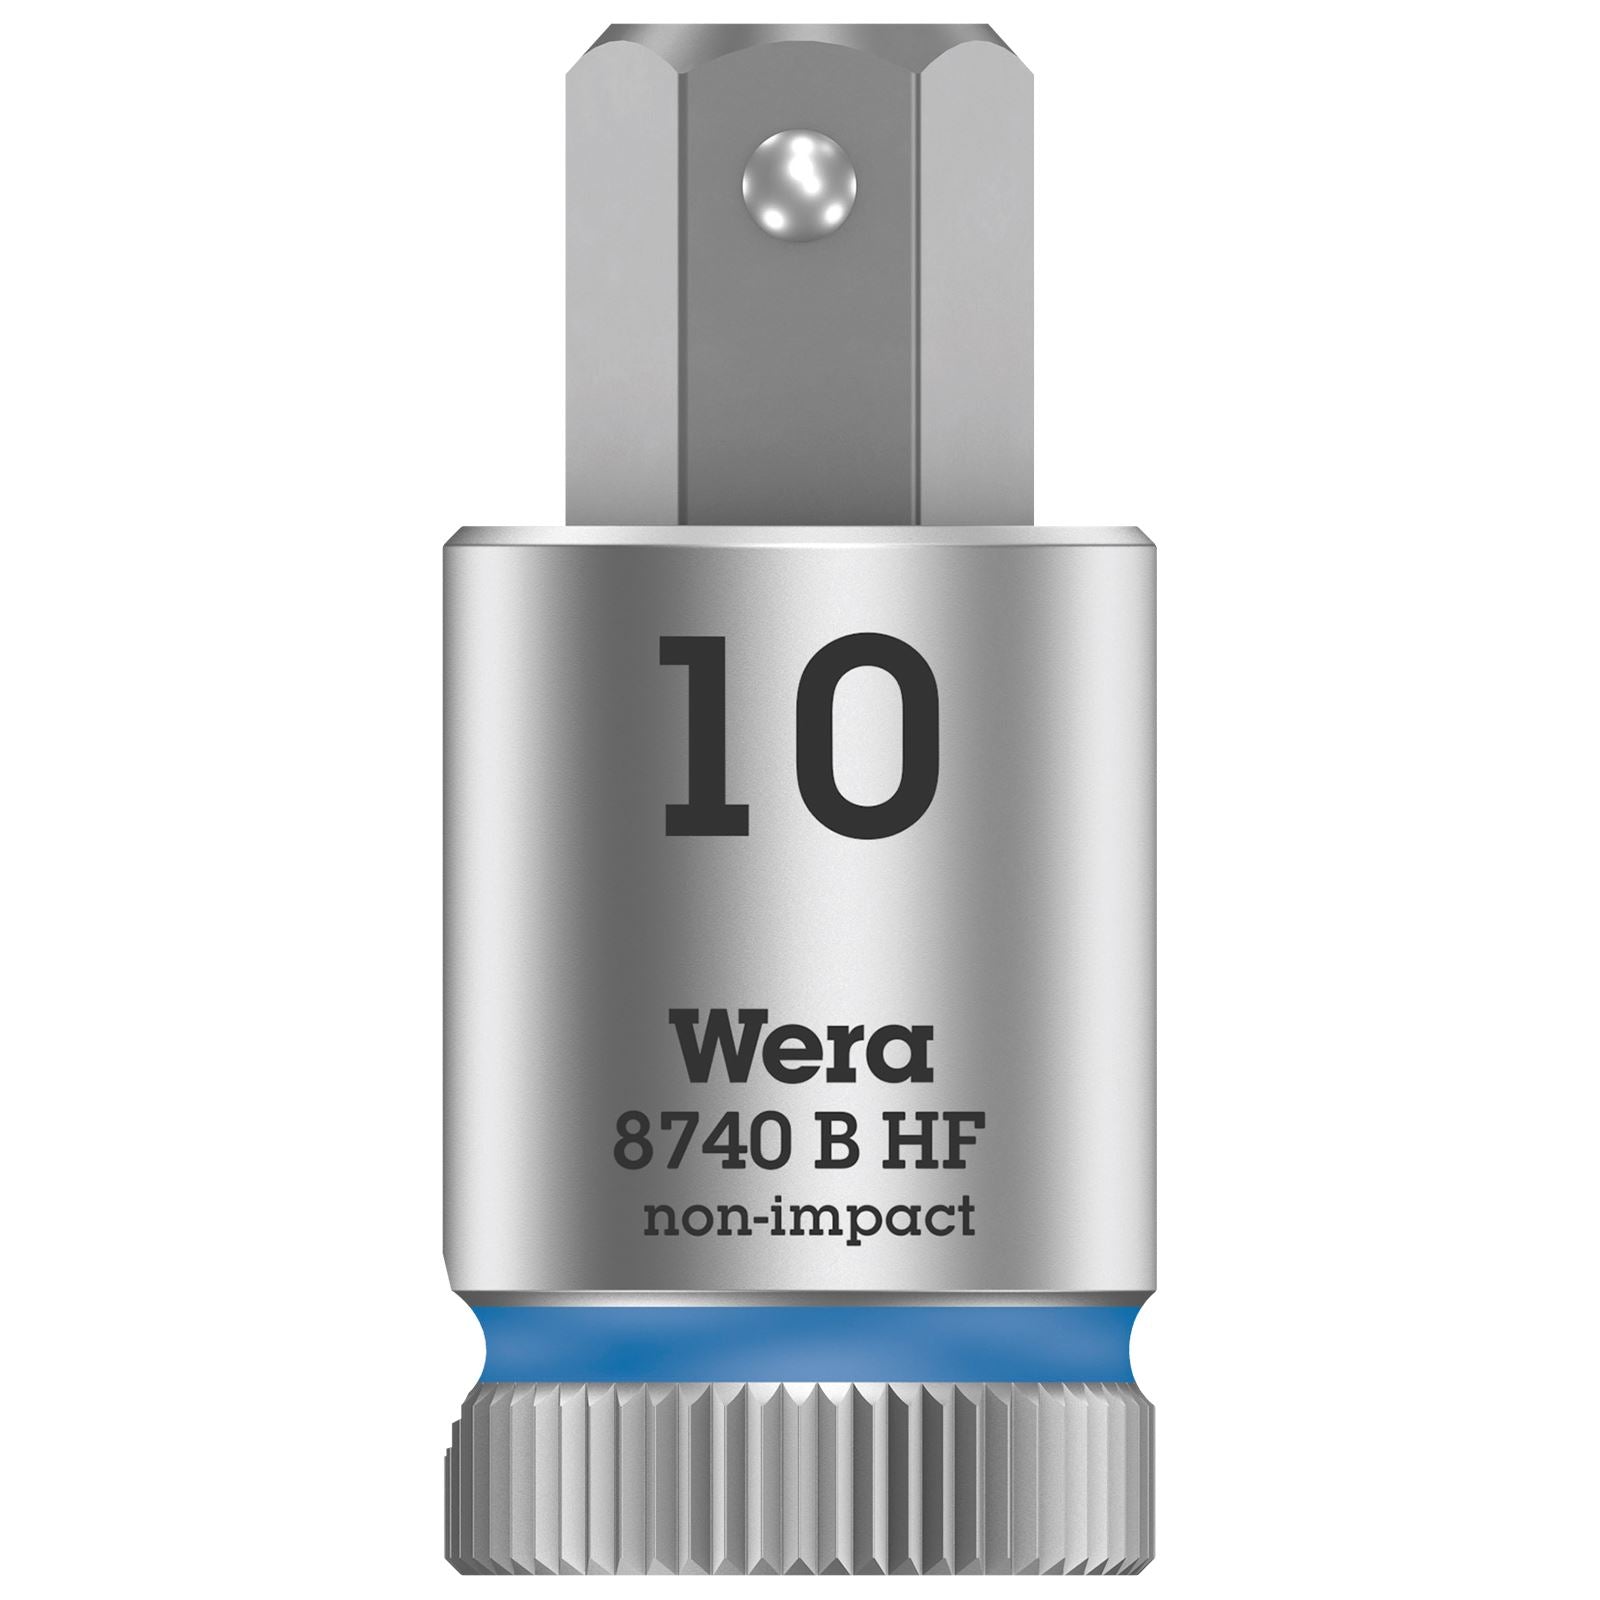 Wera Socket Bit Hex HF 3/8" Drive Zyklop Socket Bits with Holding Function 8740 B 3-10 mm